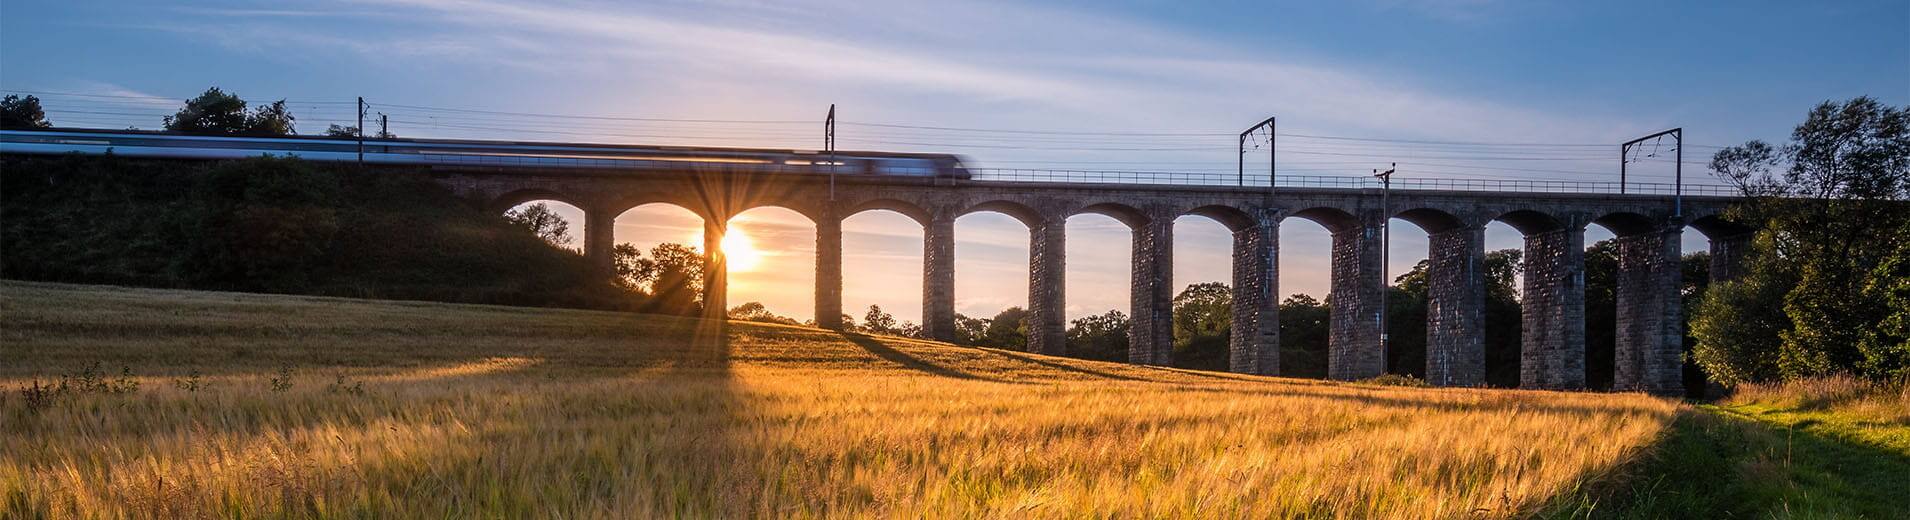 Train on River Aln Viaduct at Lesbury_S_2014